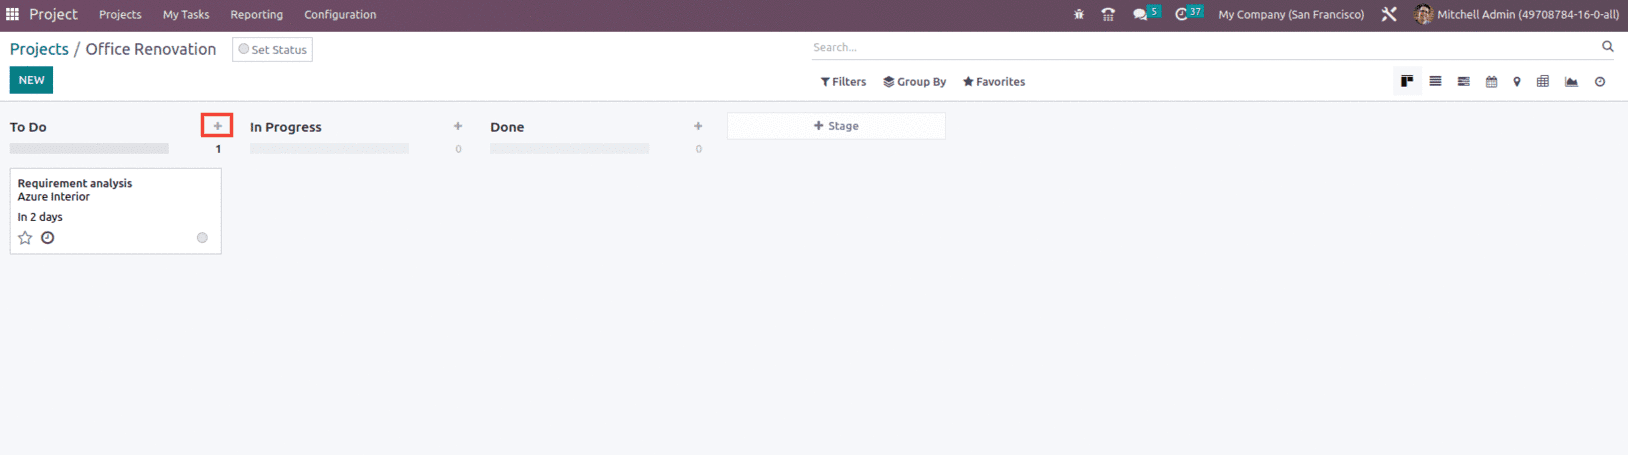 How to Track Customer Satisfaction on Tasks With Odoo 16 Project App-cybrosys